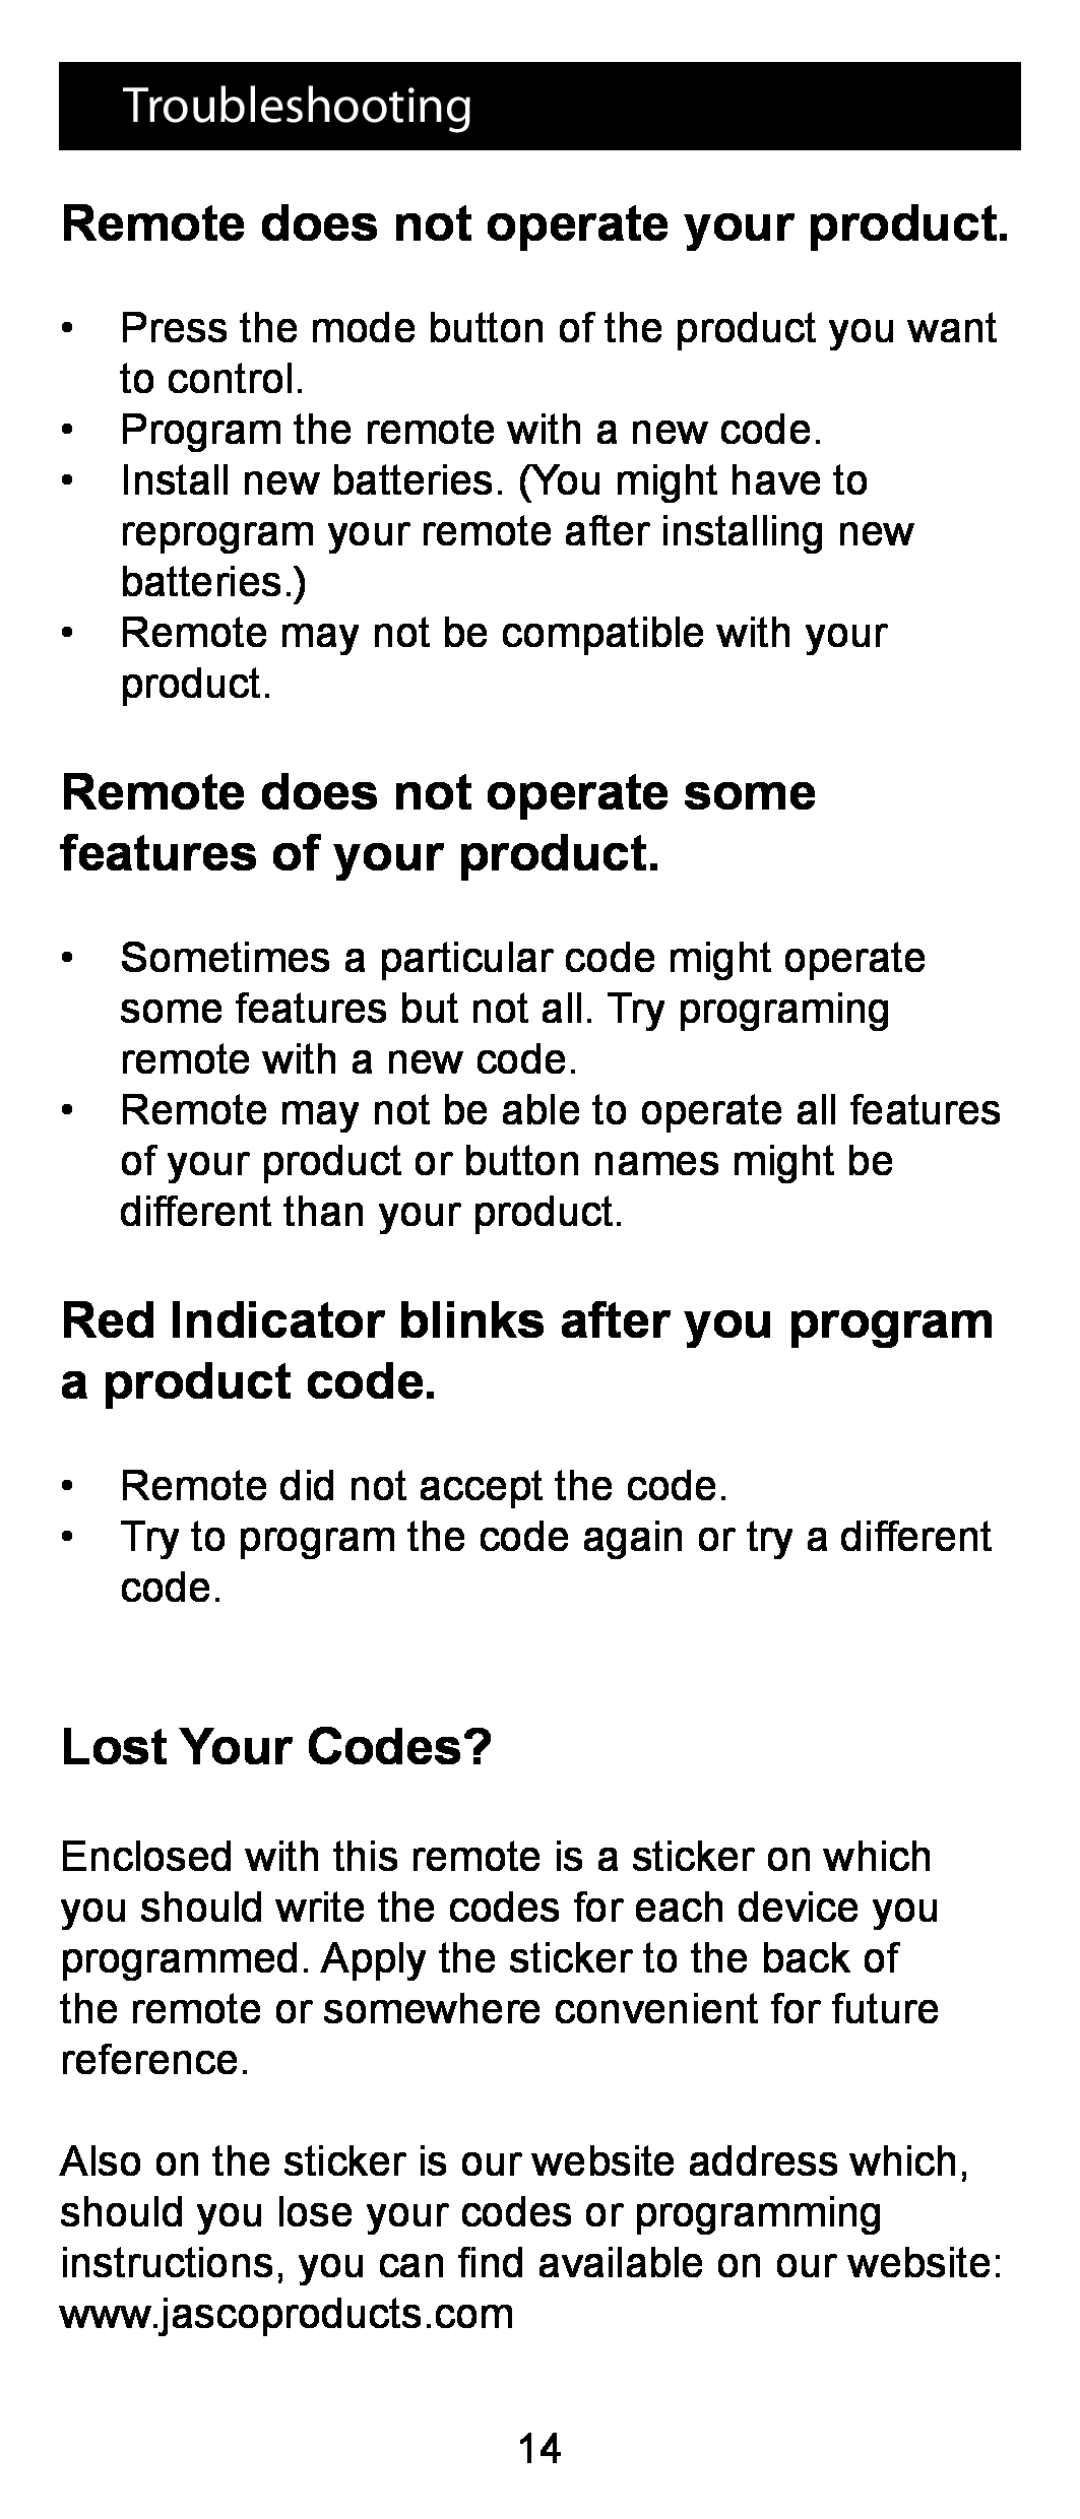 Jasco RM24993 Troubleshooting, Remote does not operate your product, Remote does not operate some features of your product 